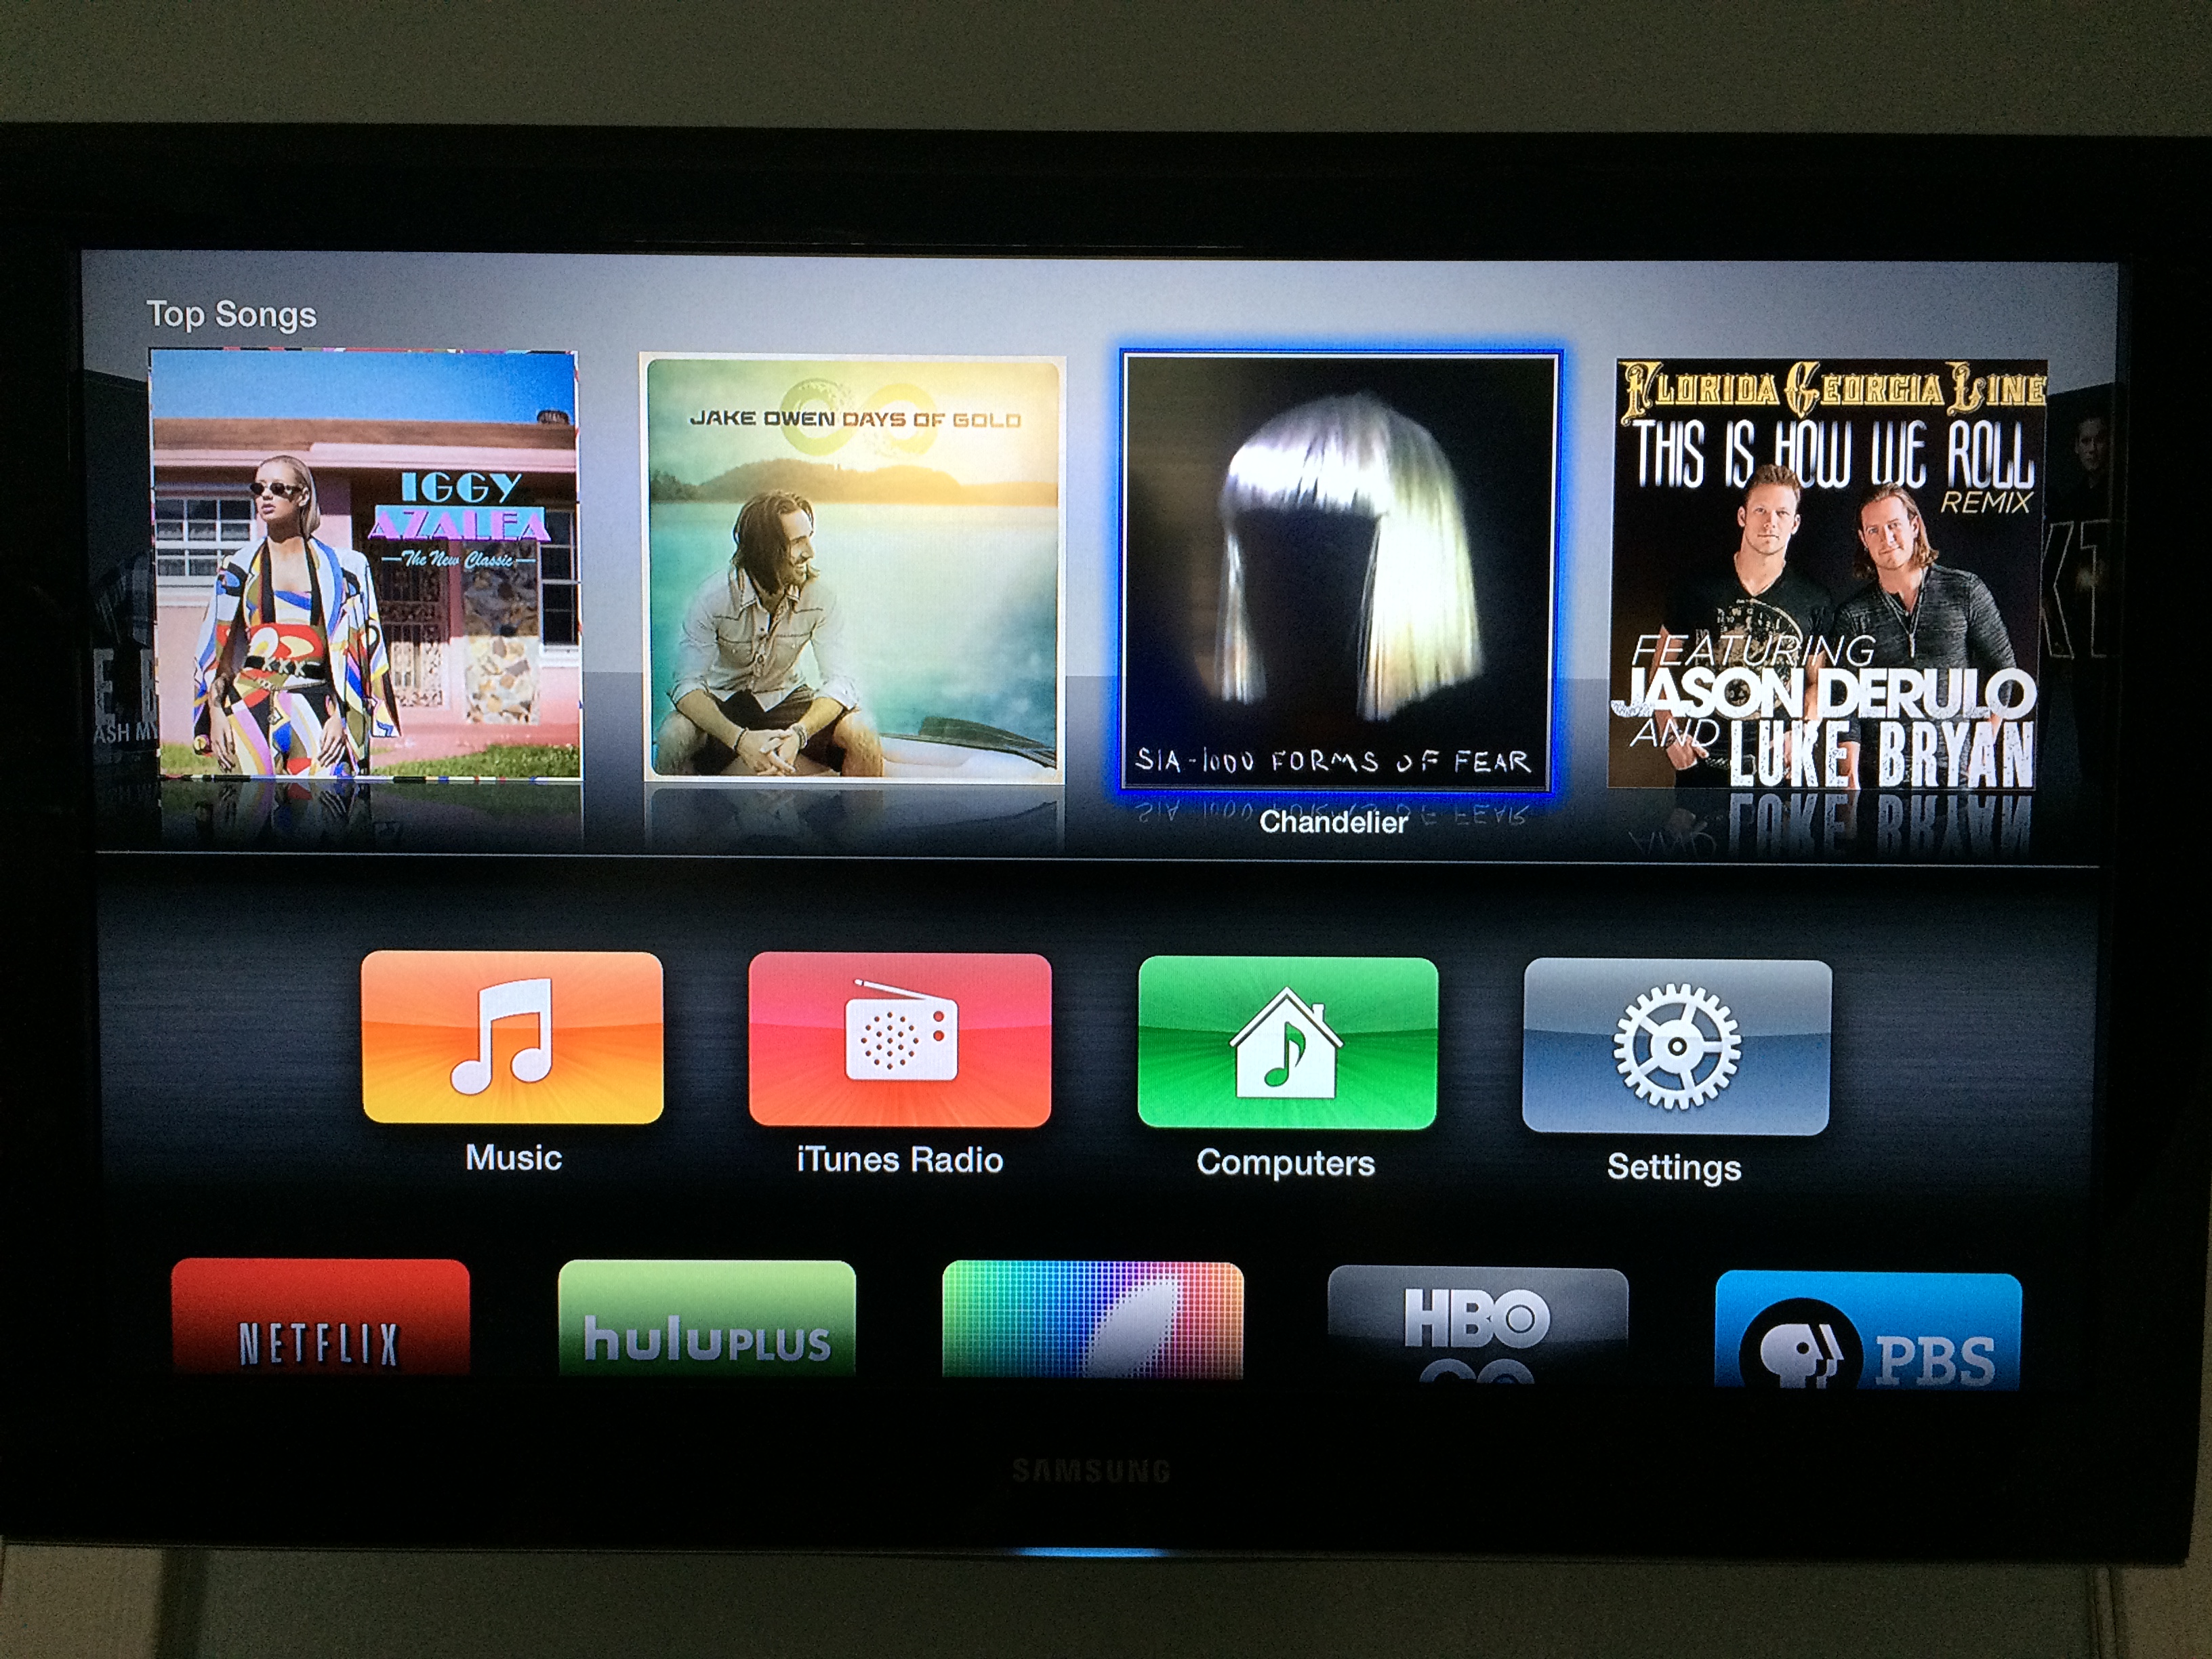 App Store, iTunes Store, Apple TV features currently